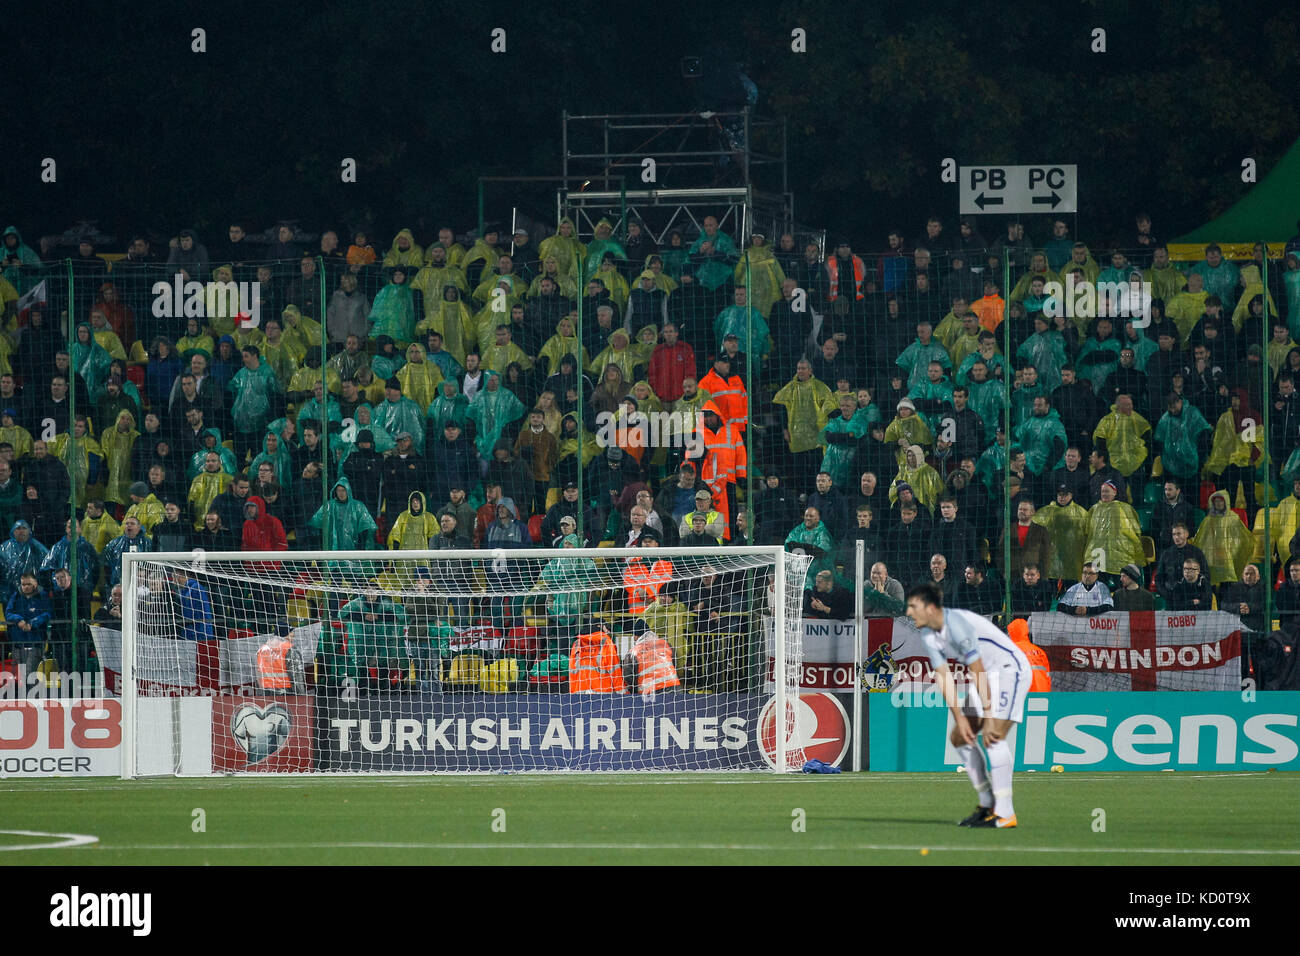 Vilnius, Lithuania. 8th Oct, 2017. England fans during the FIFA World Cup 2018 Qualifying Group F match between Lithuania and England at LFF Stadium on October 8th 2017 in Vilnius, Lithuania. . Credit: PHC Images/Alamy Live News Stock Photo